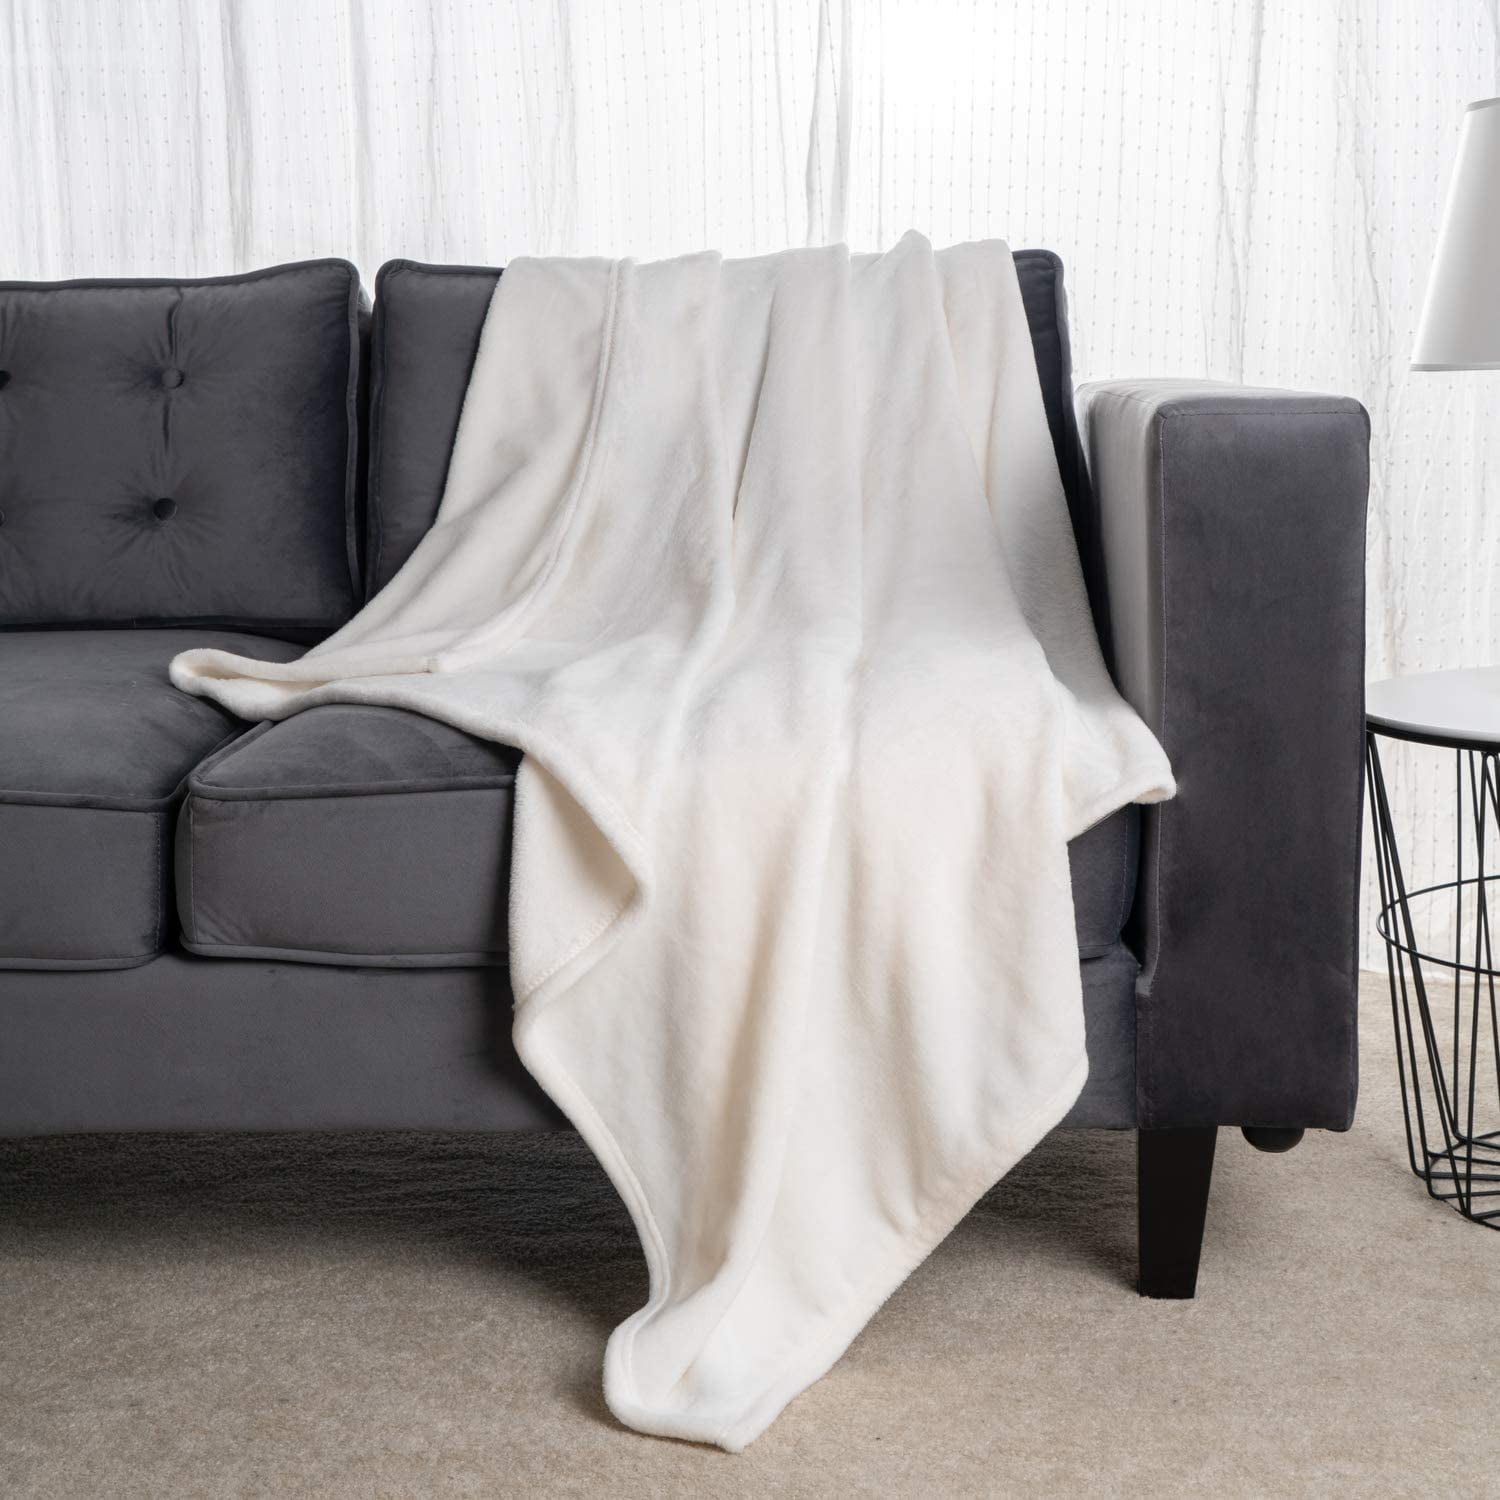 Details about   Soft Mink Flannel Throw Fleece Warm Large Sofa Bed Blanket Single to King Sizes 